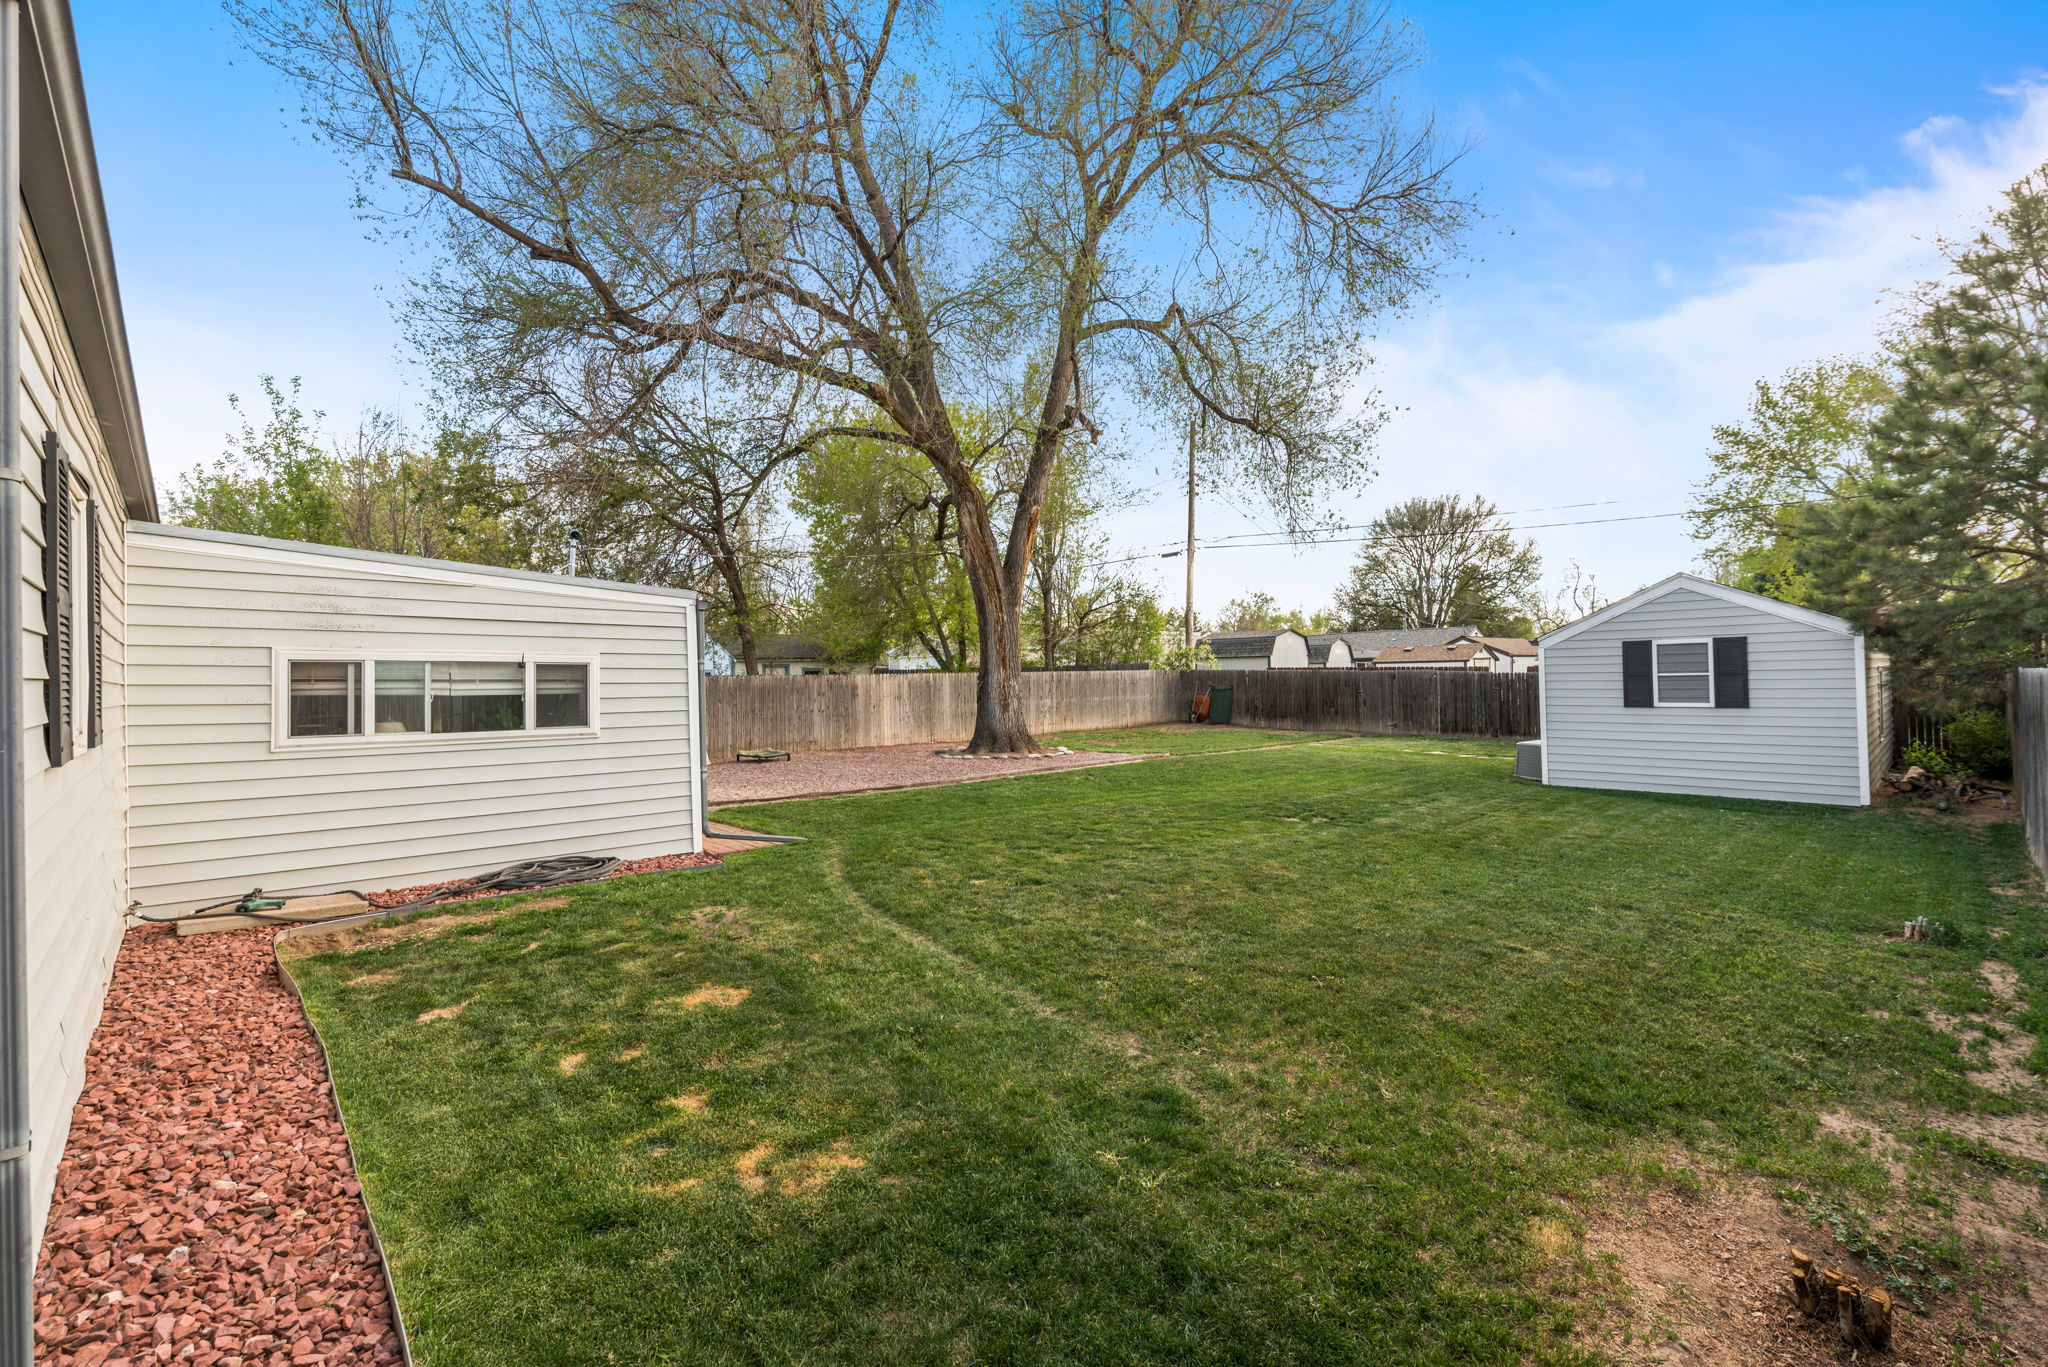  3237 S Franklin St, Englewood, CO 80113, US Photo 24